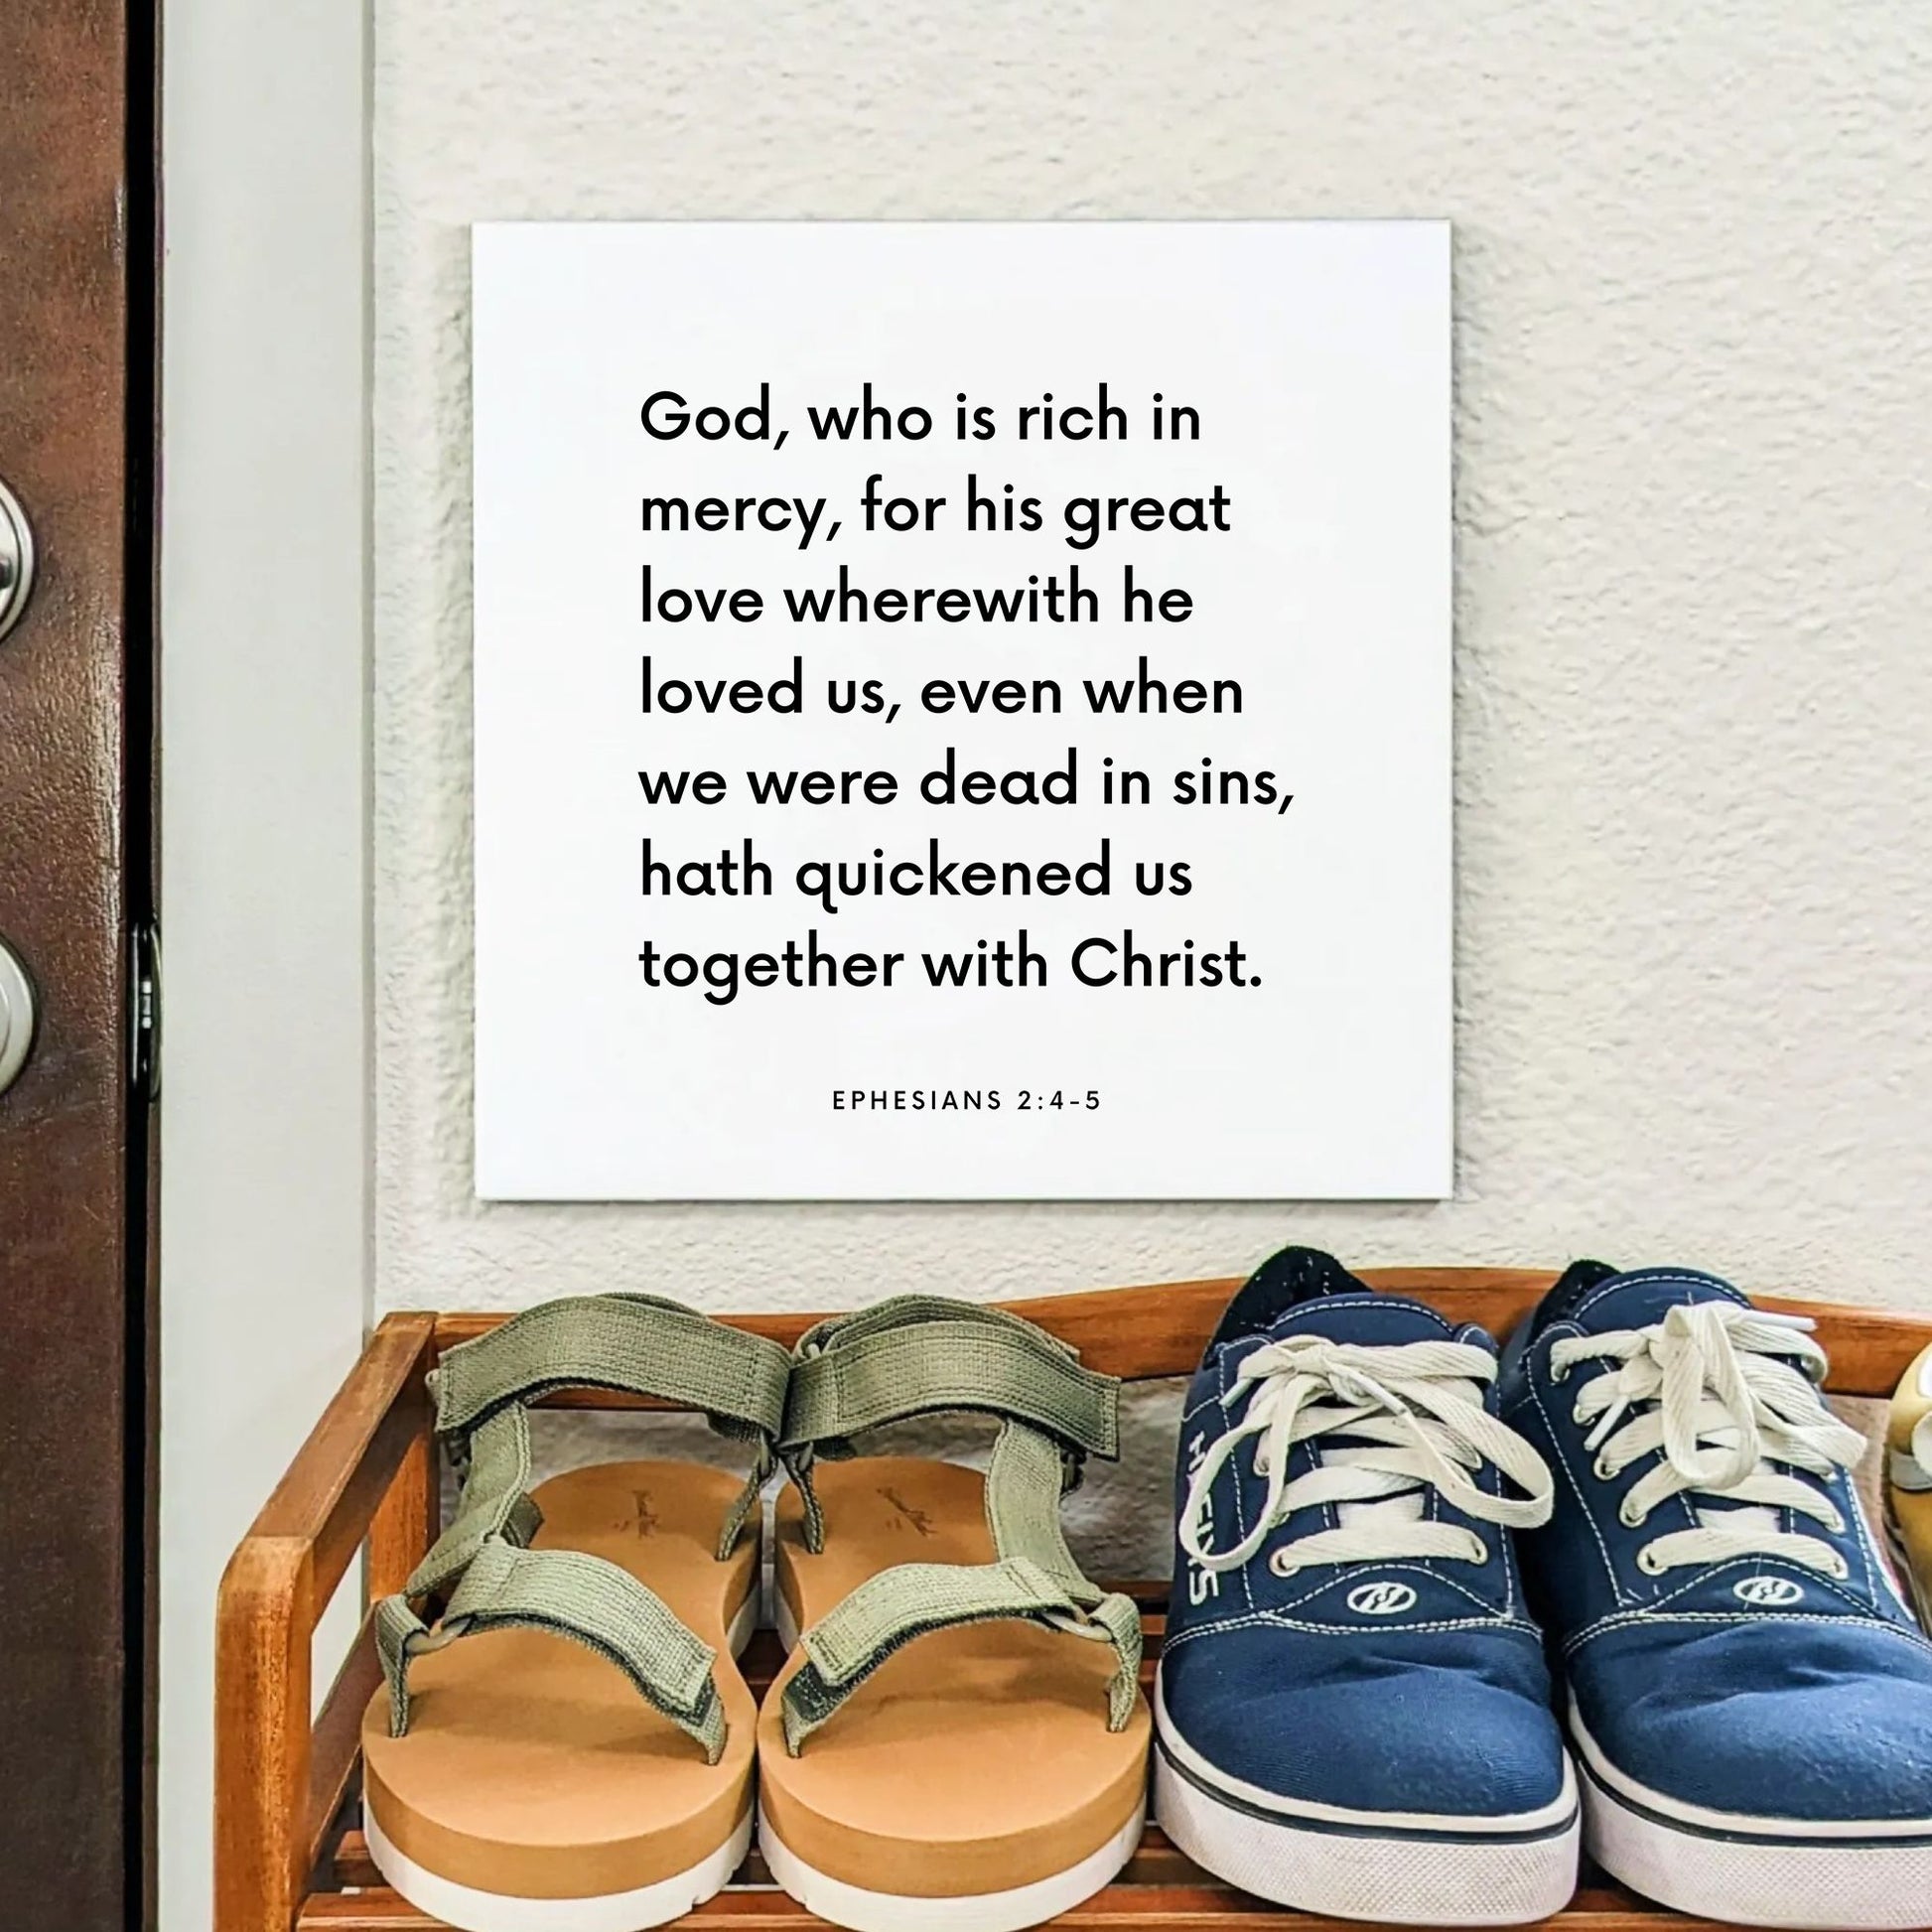 Shoes mouting of the scripture tile for Ephesians 2:4-5 - "God, who is rich in mercy"